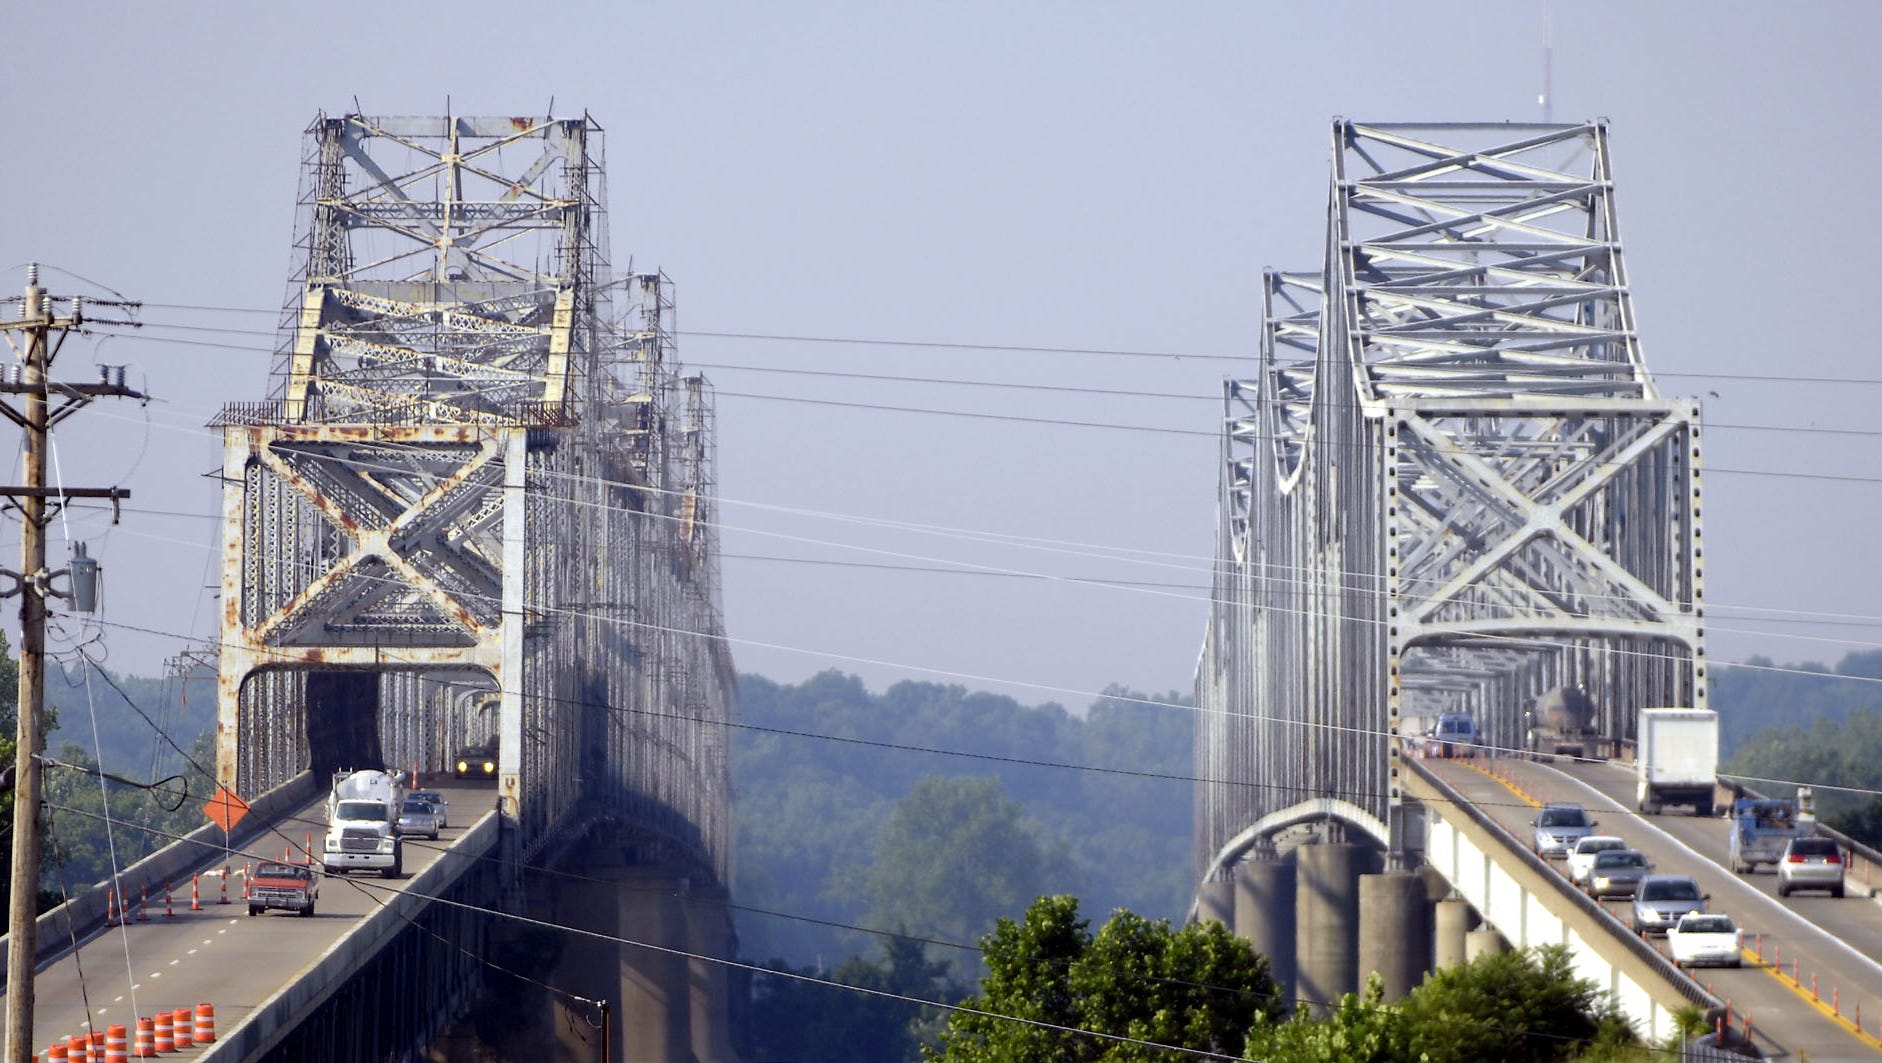 Will twin bridges both survive, or be tolled? Hearings coming up